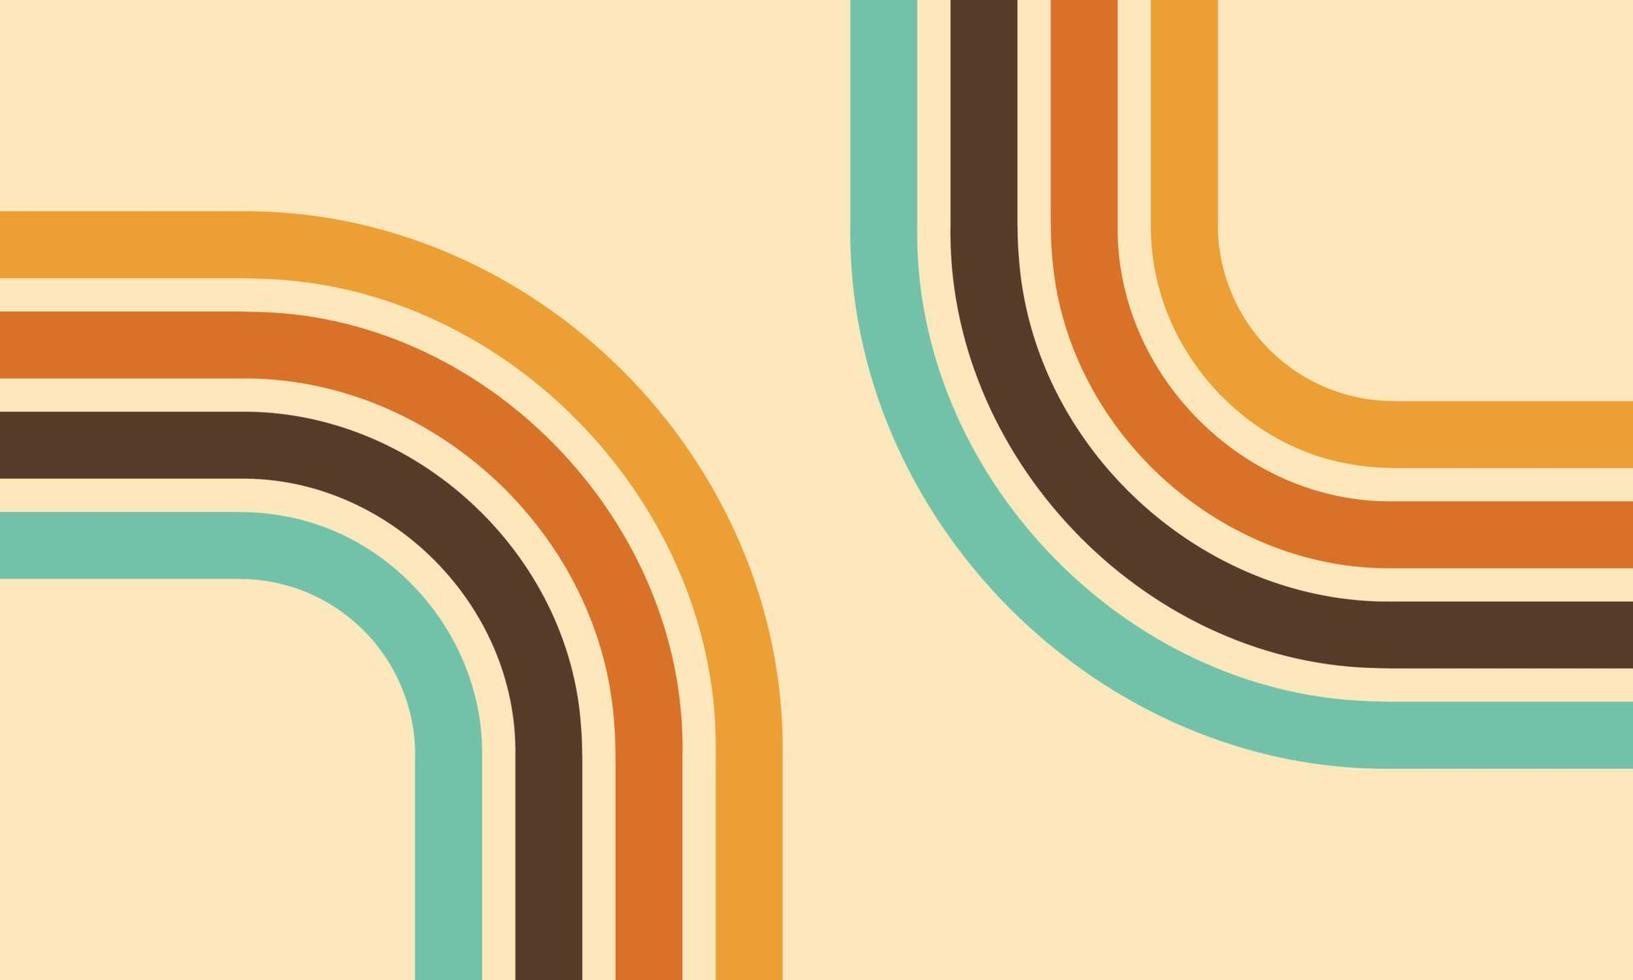 Retro lines background. Colorful 60s and 70s circular stripes style vector illustration design.